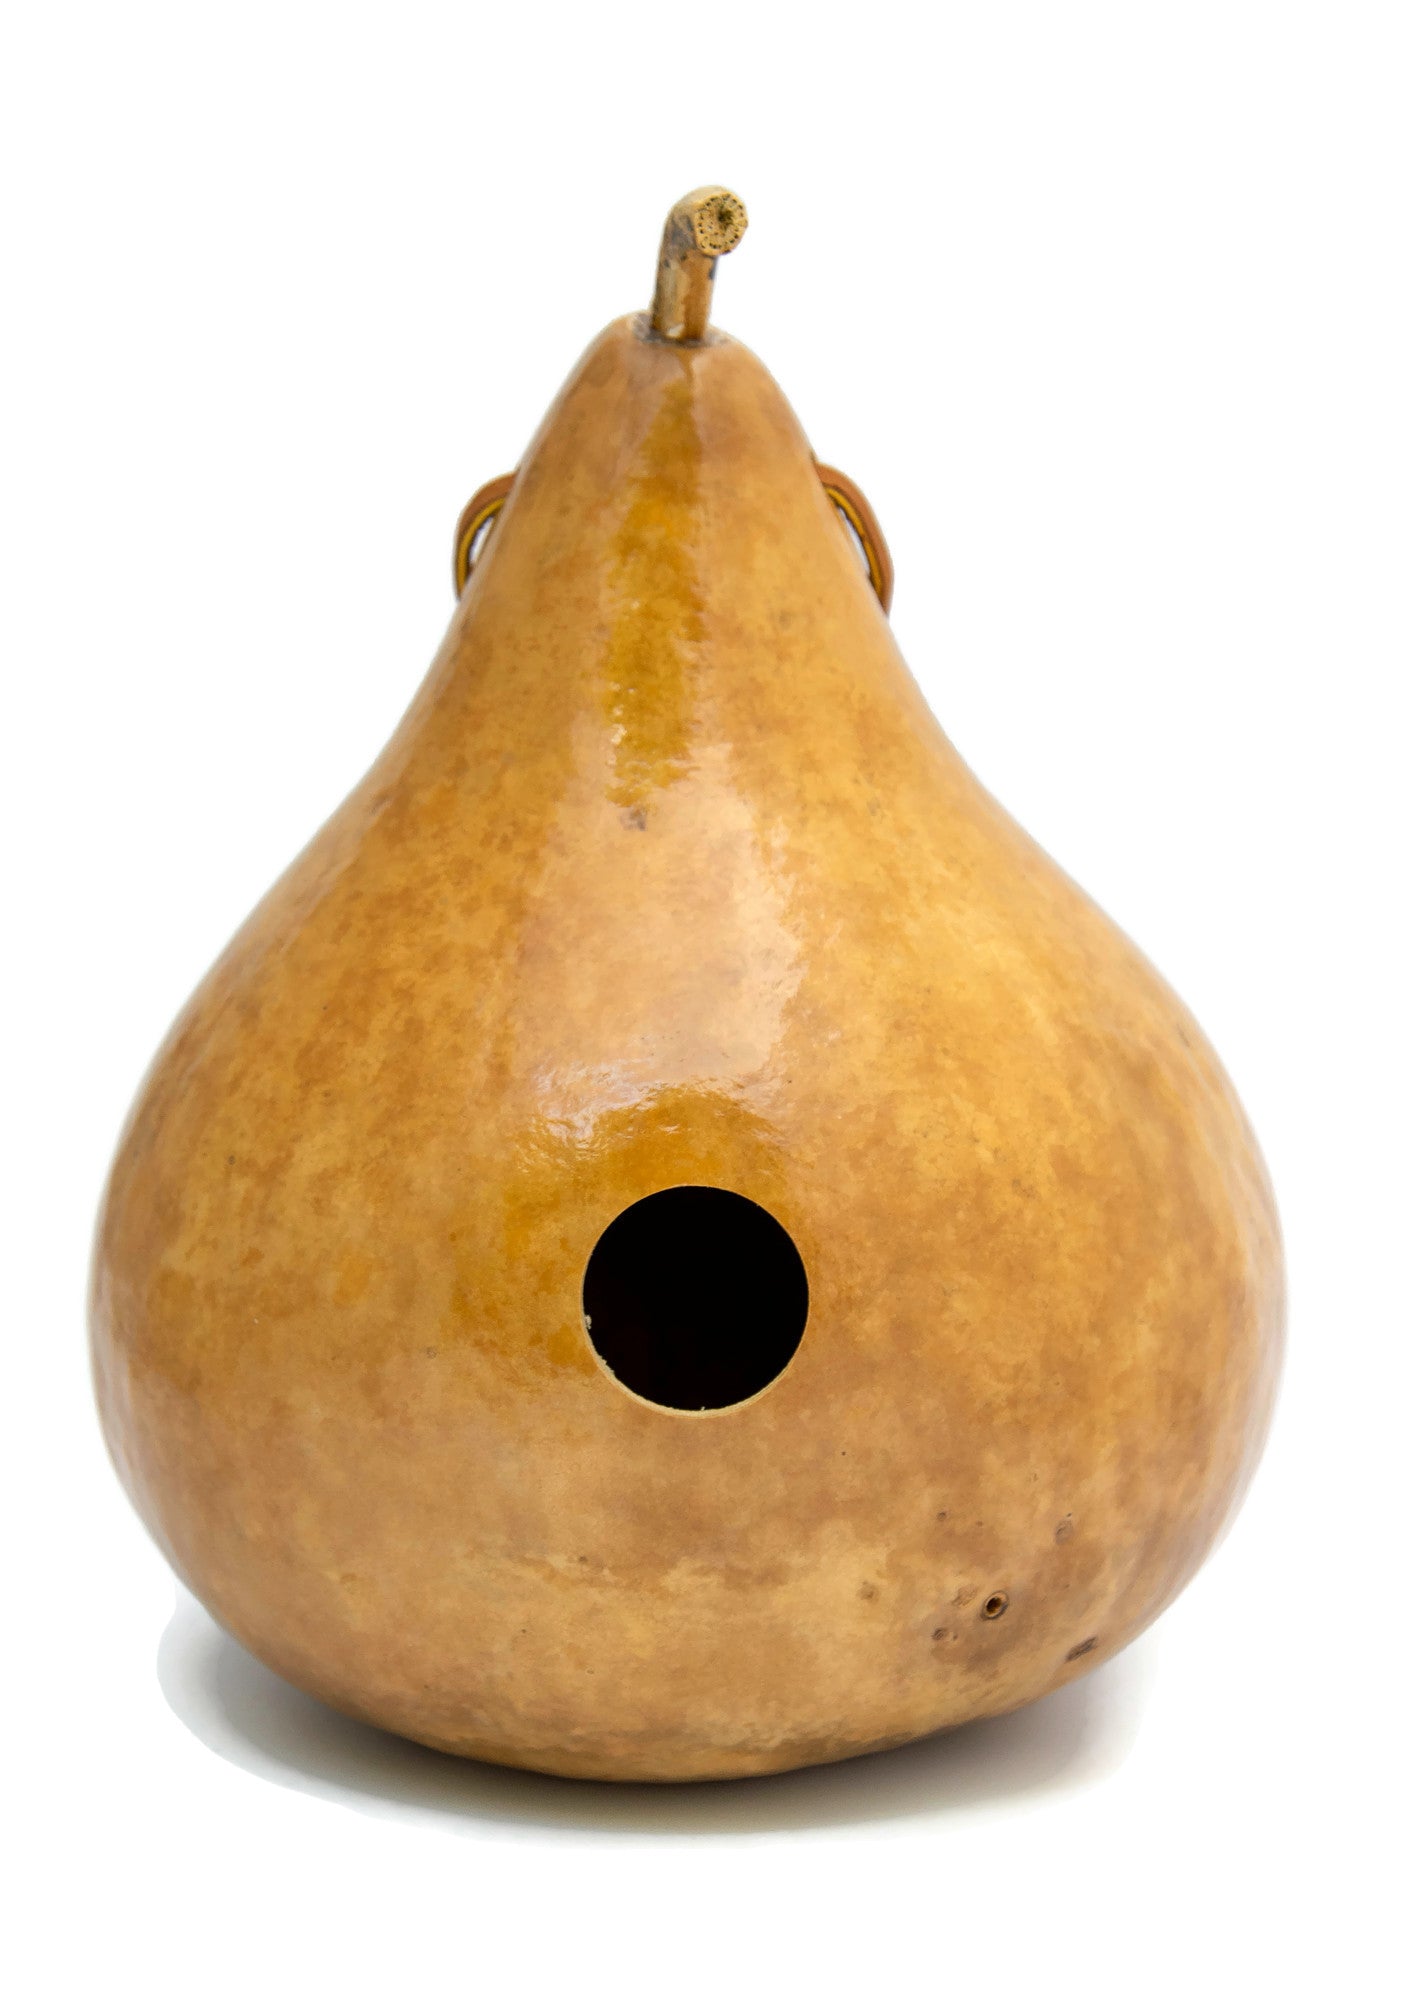 Gourd Birdhouse - Natural Finish - Perfect for a Bird's Nest!